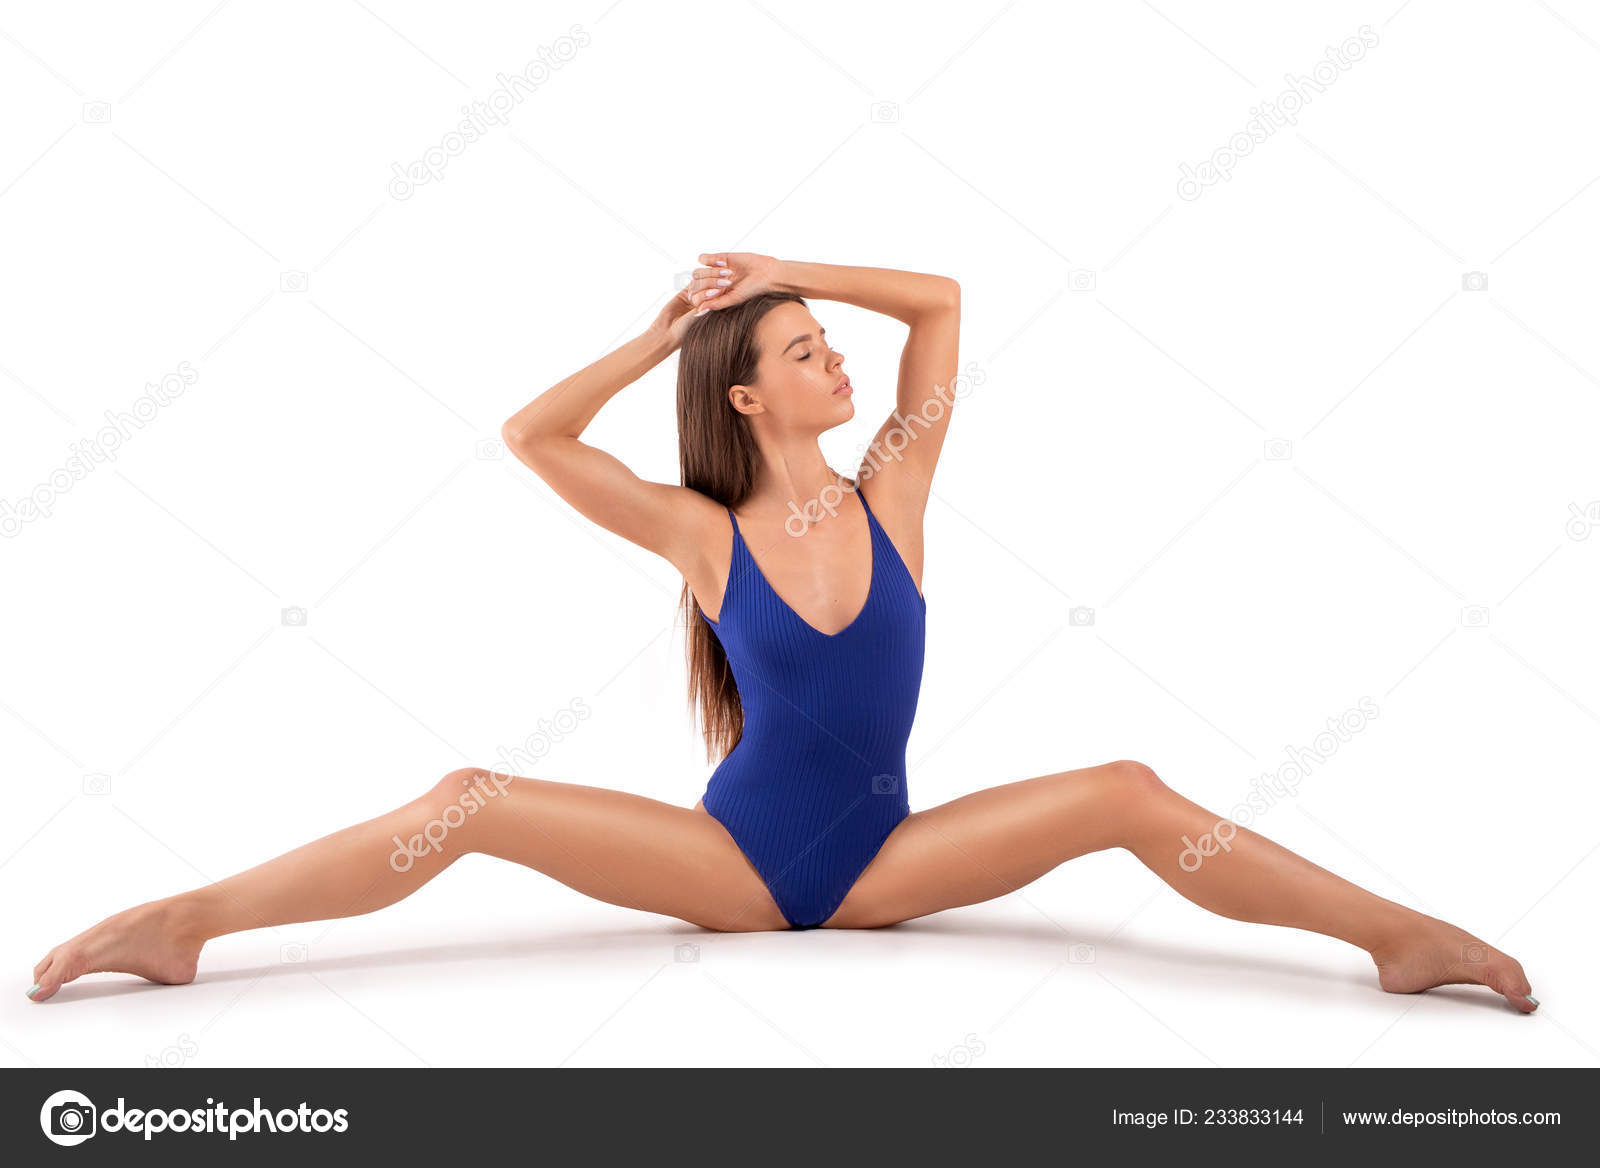 Pictures Of Flexible Girls